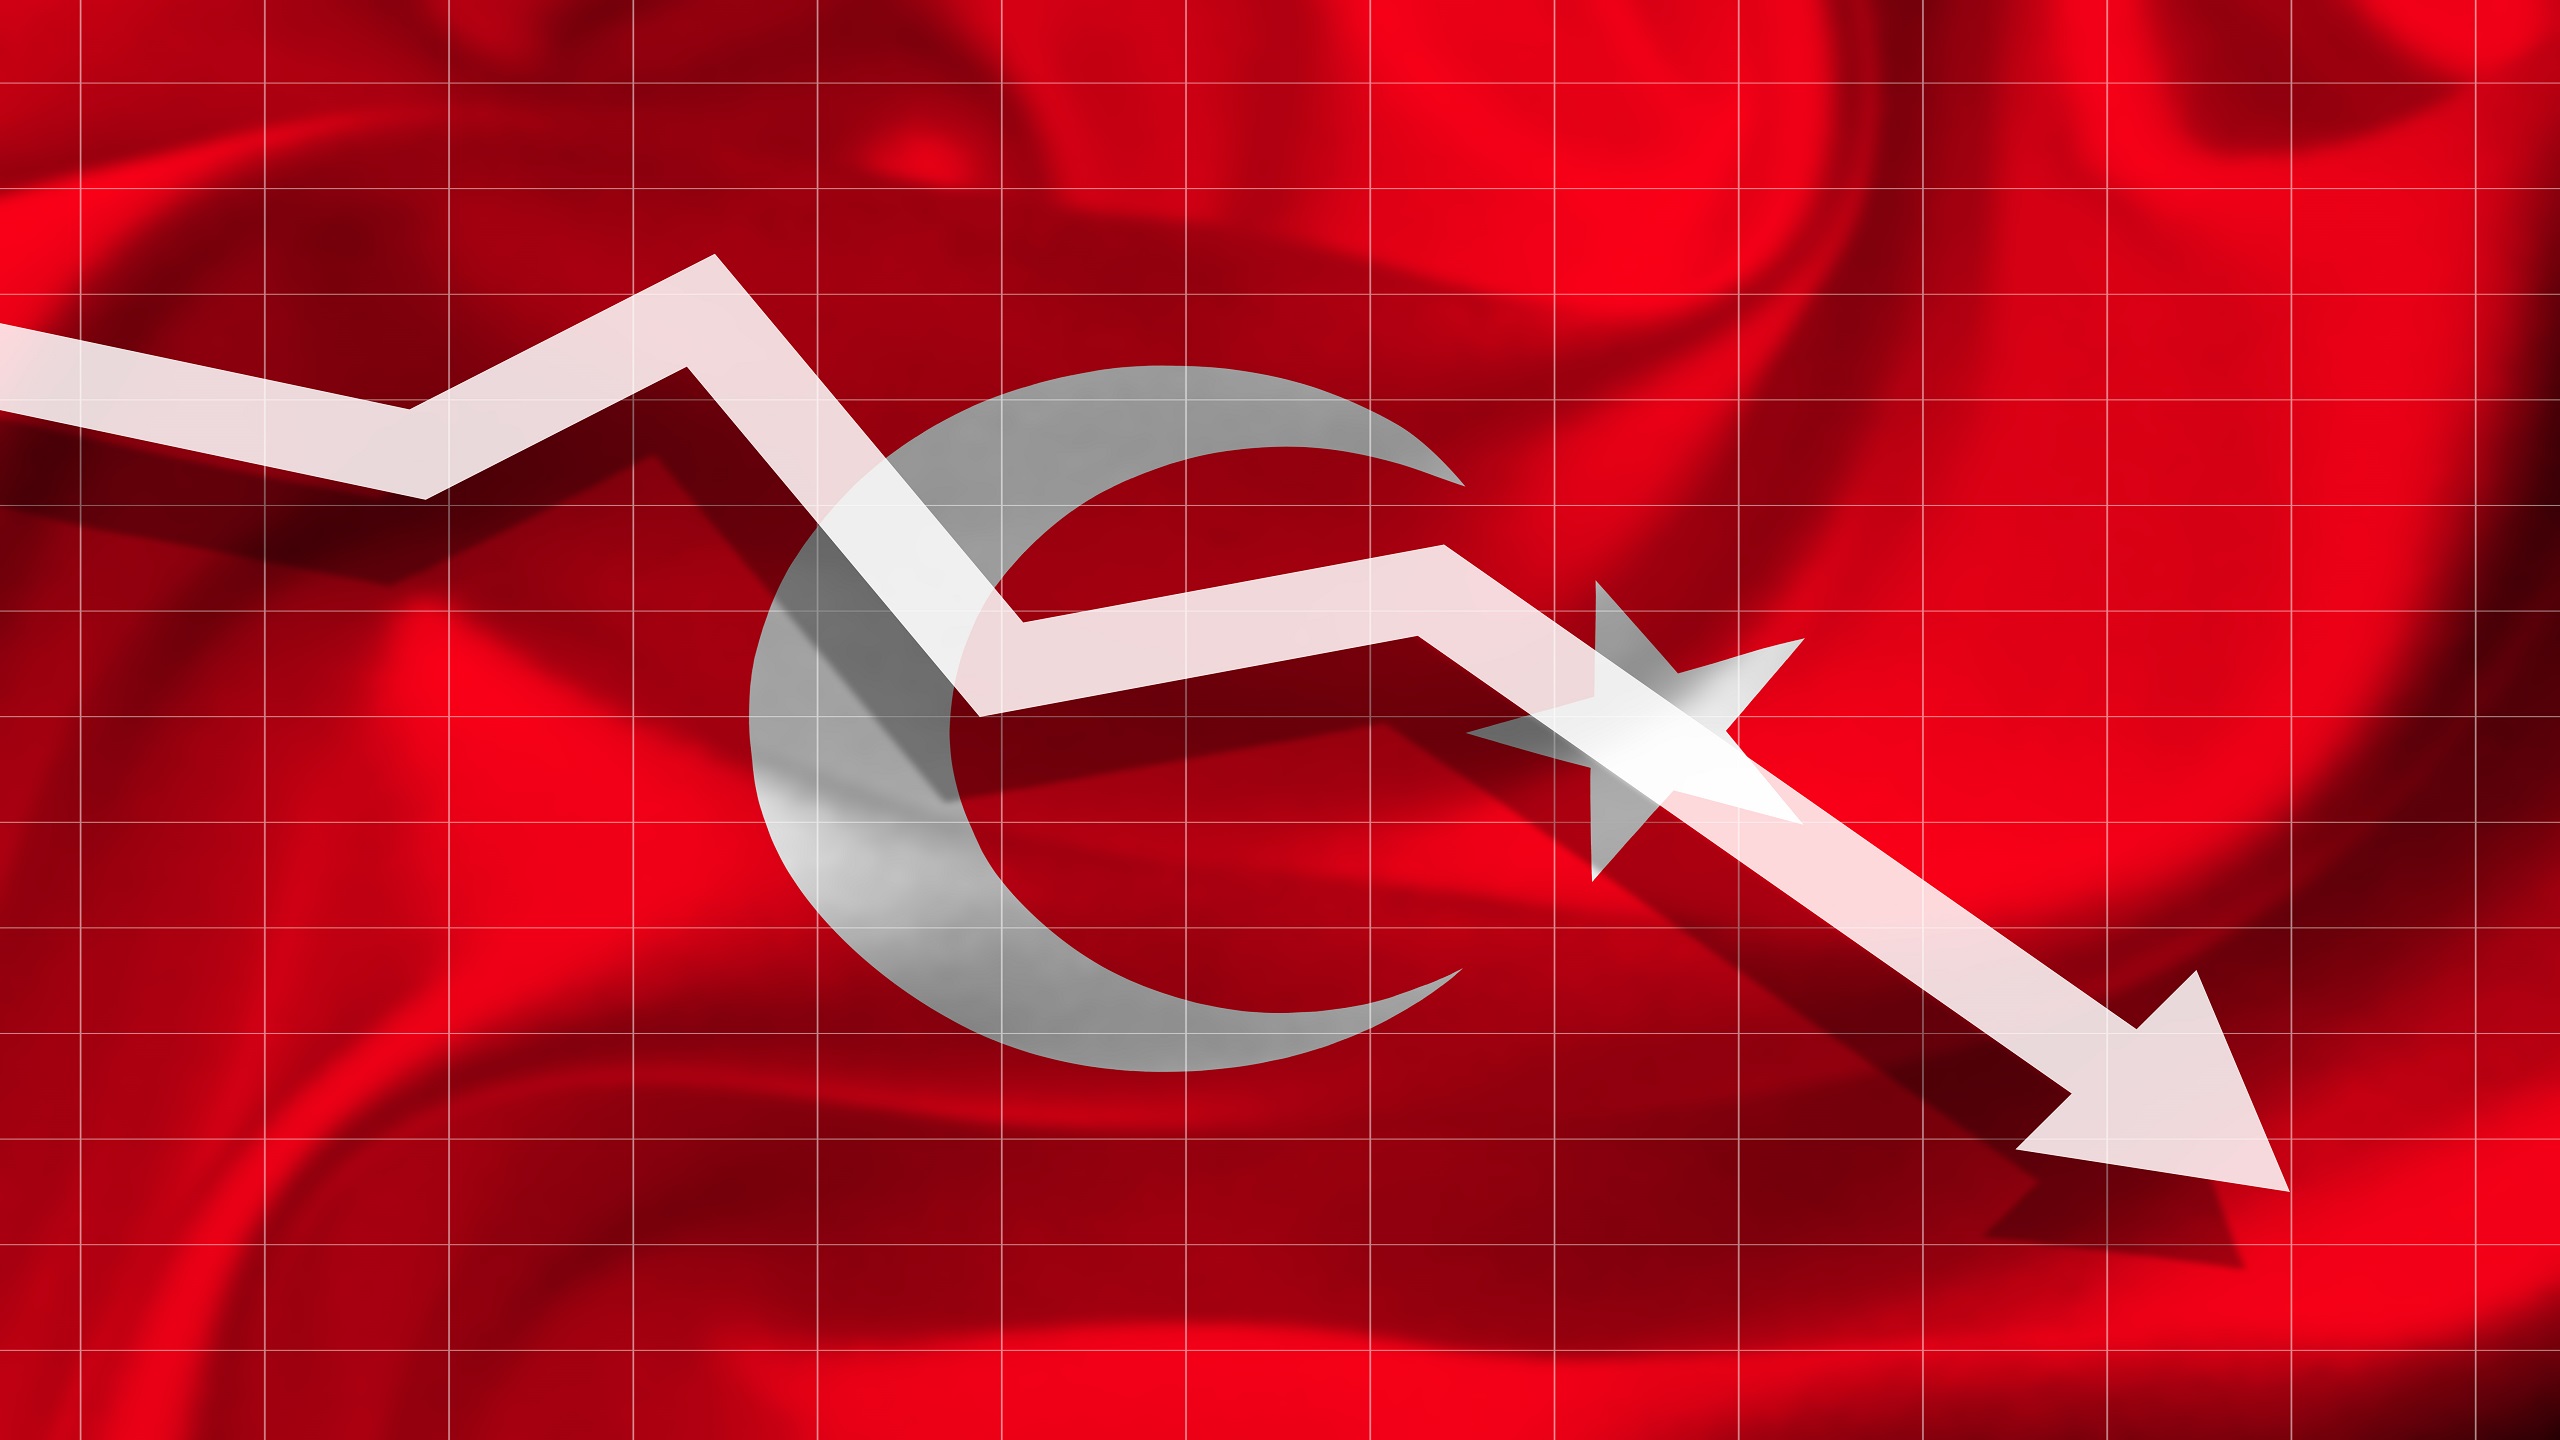 Turkey’s Inflation Rate Shows Signs of Stabilization Following Erdogan’s Policy Shift